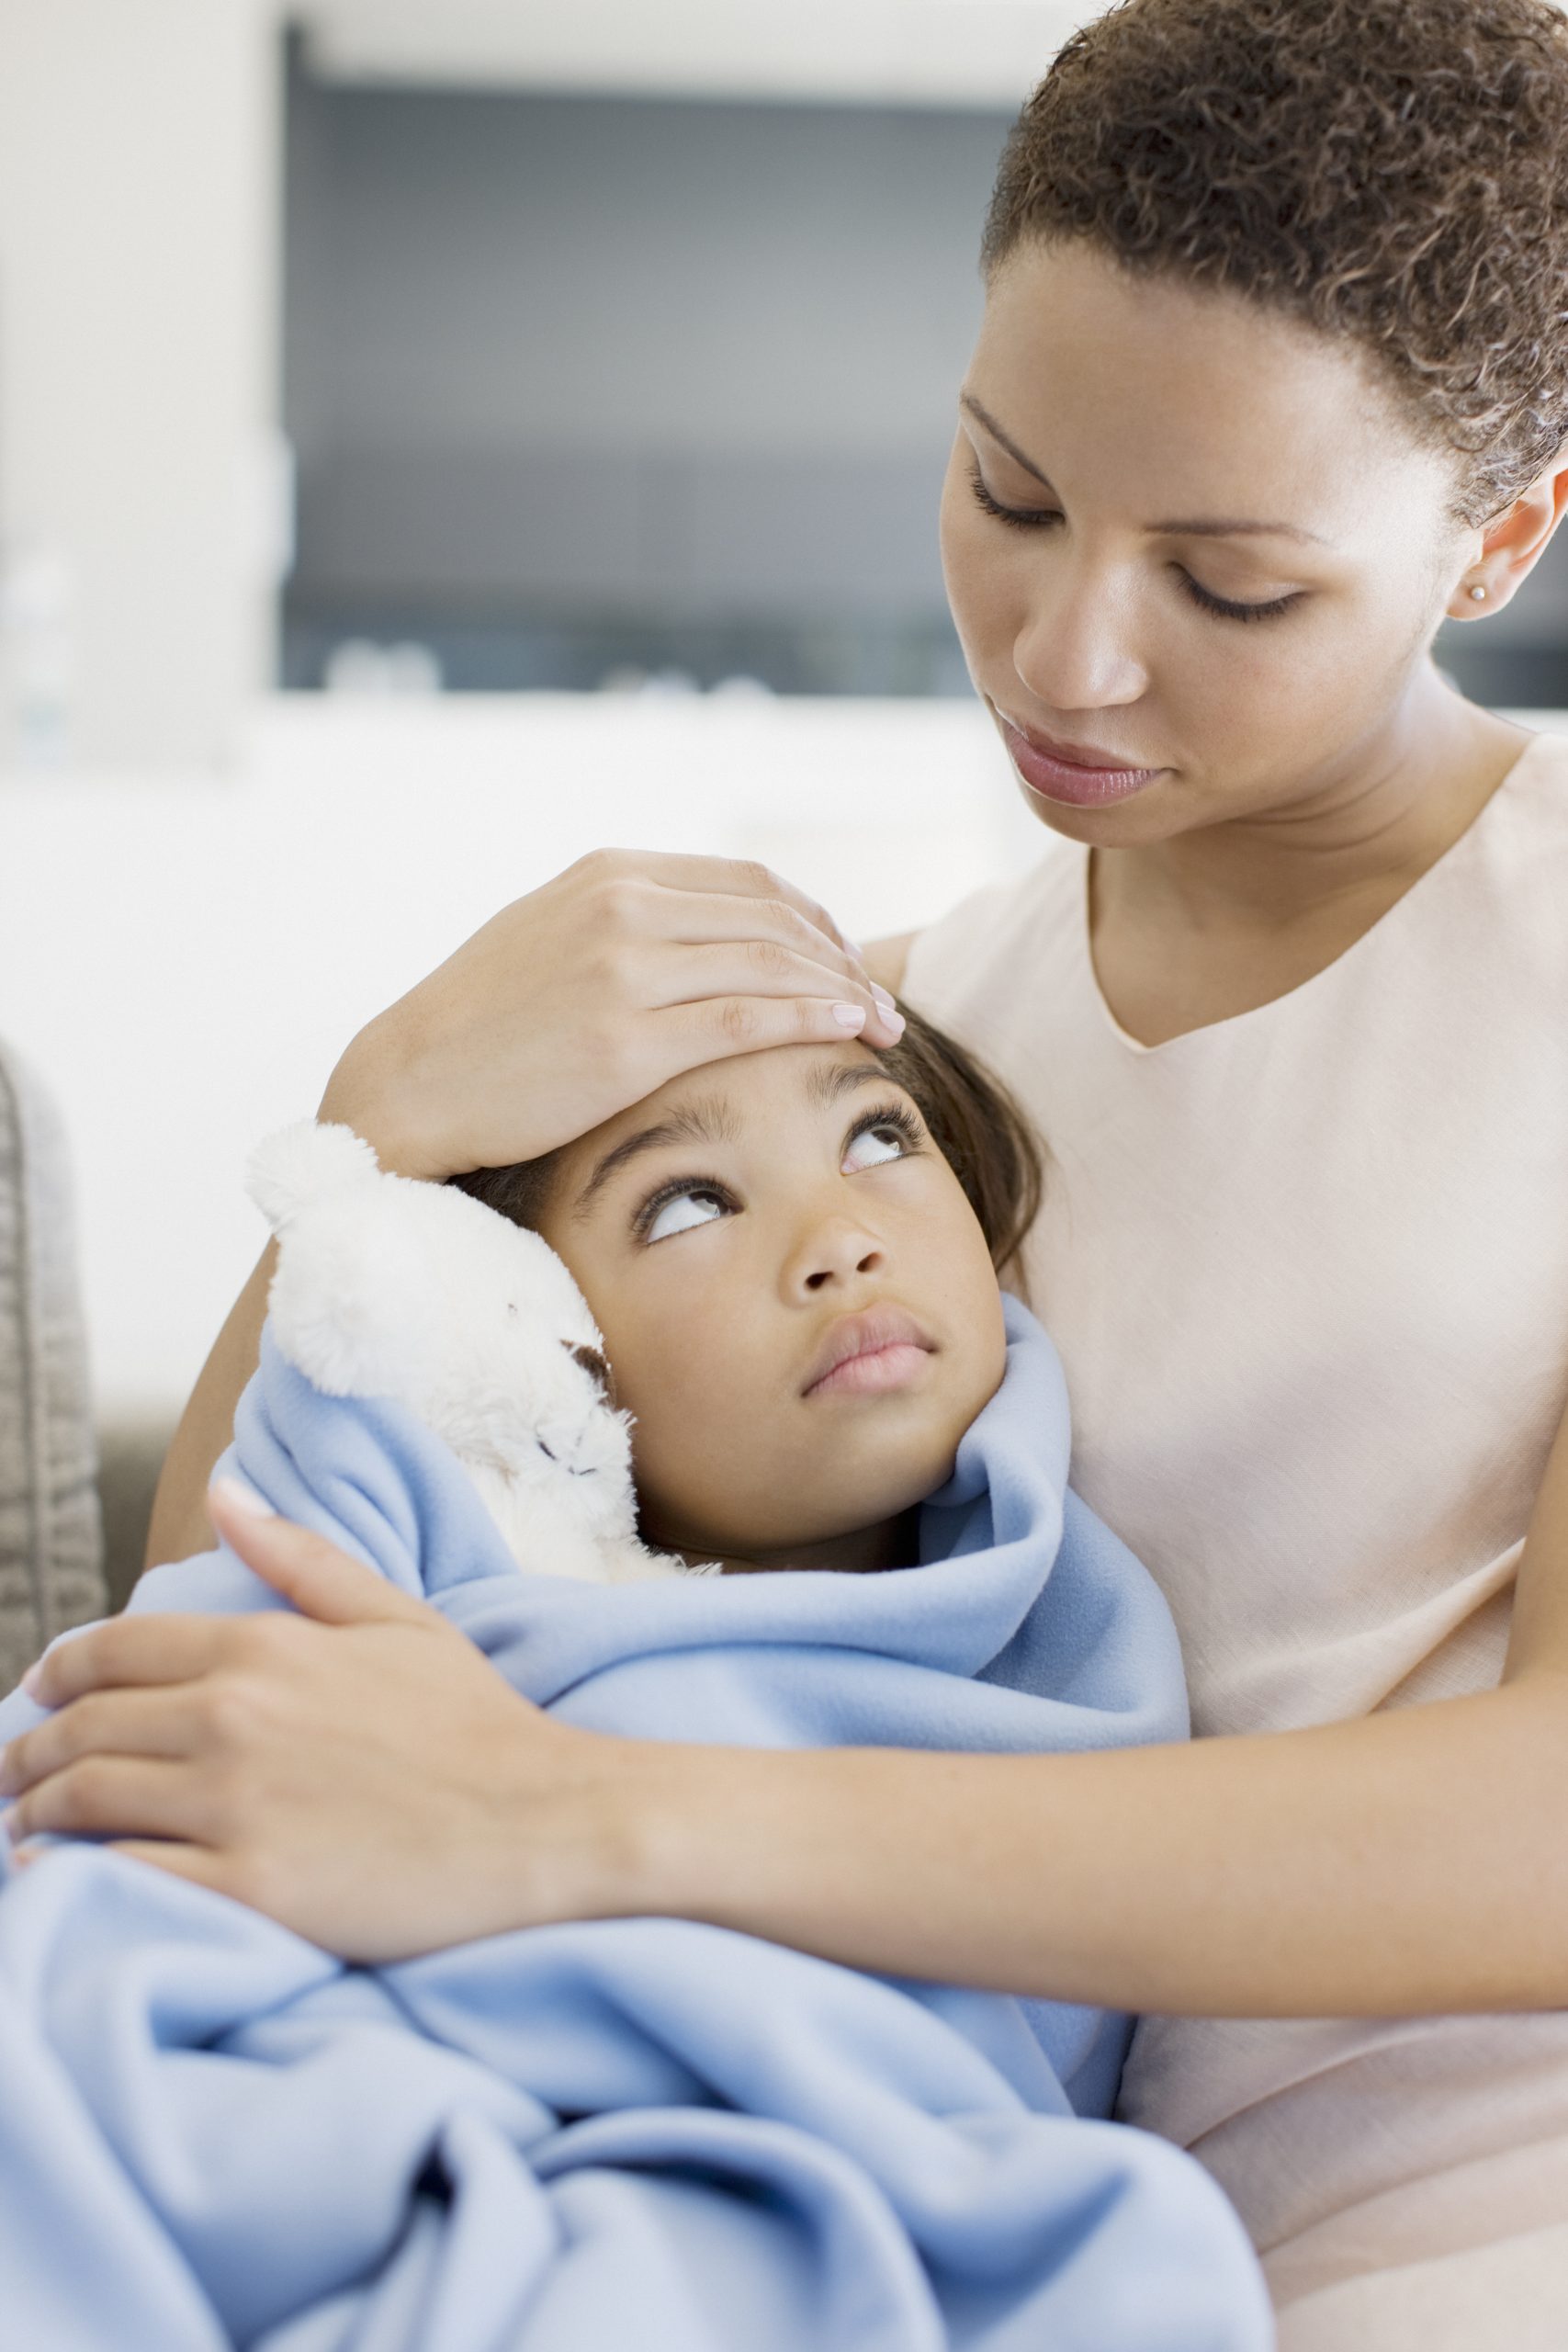 Woman touching the forehead of and looking down at sick daughter in her arms. Her daughter is wrapped in a blanket holding a stuffed animal and looks up at her with big eyes